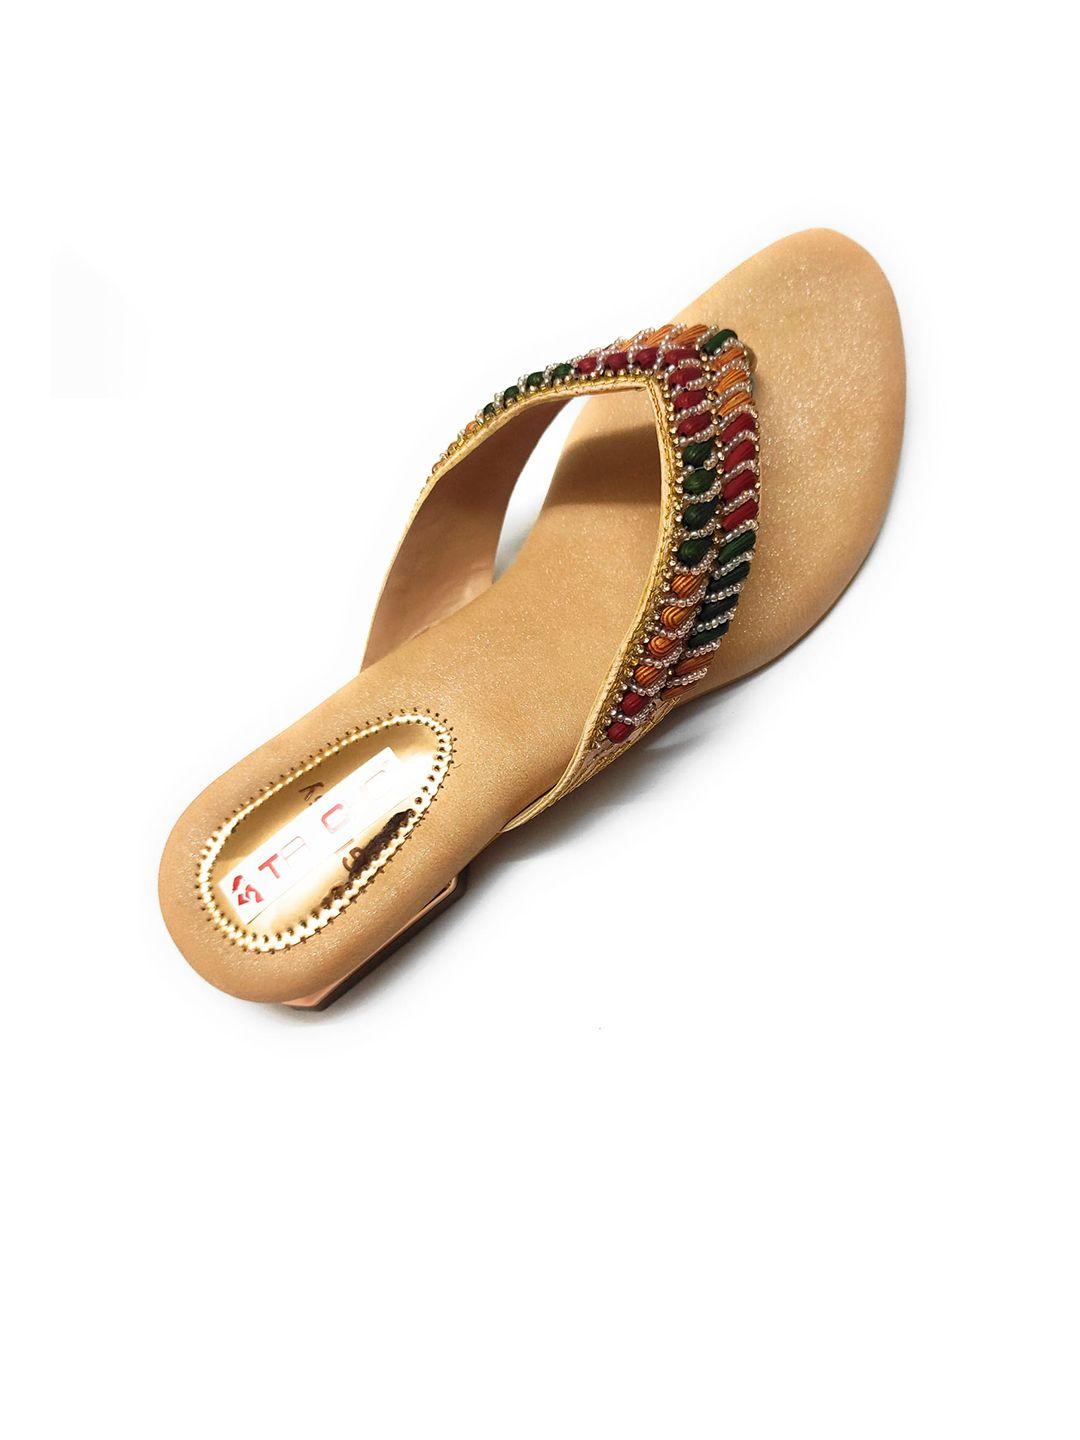 ta chic women gold-toned ethnic ballerinas with bows flats